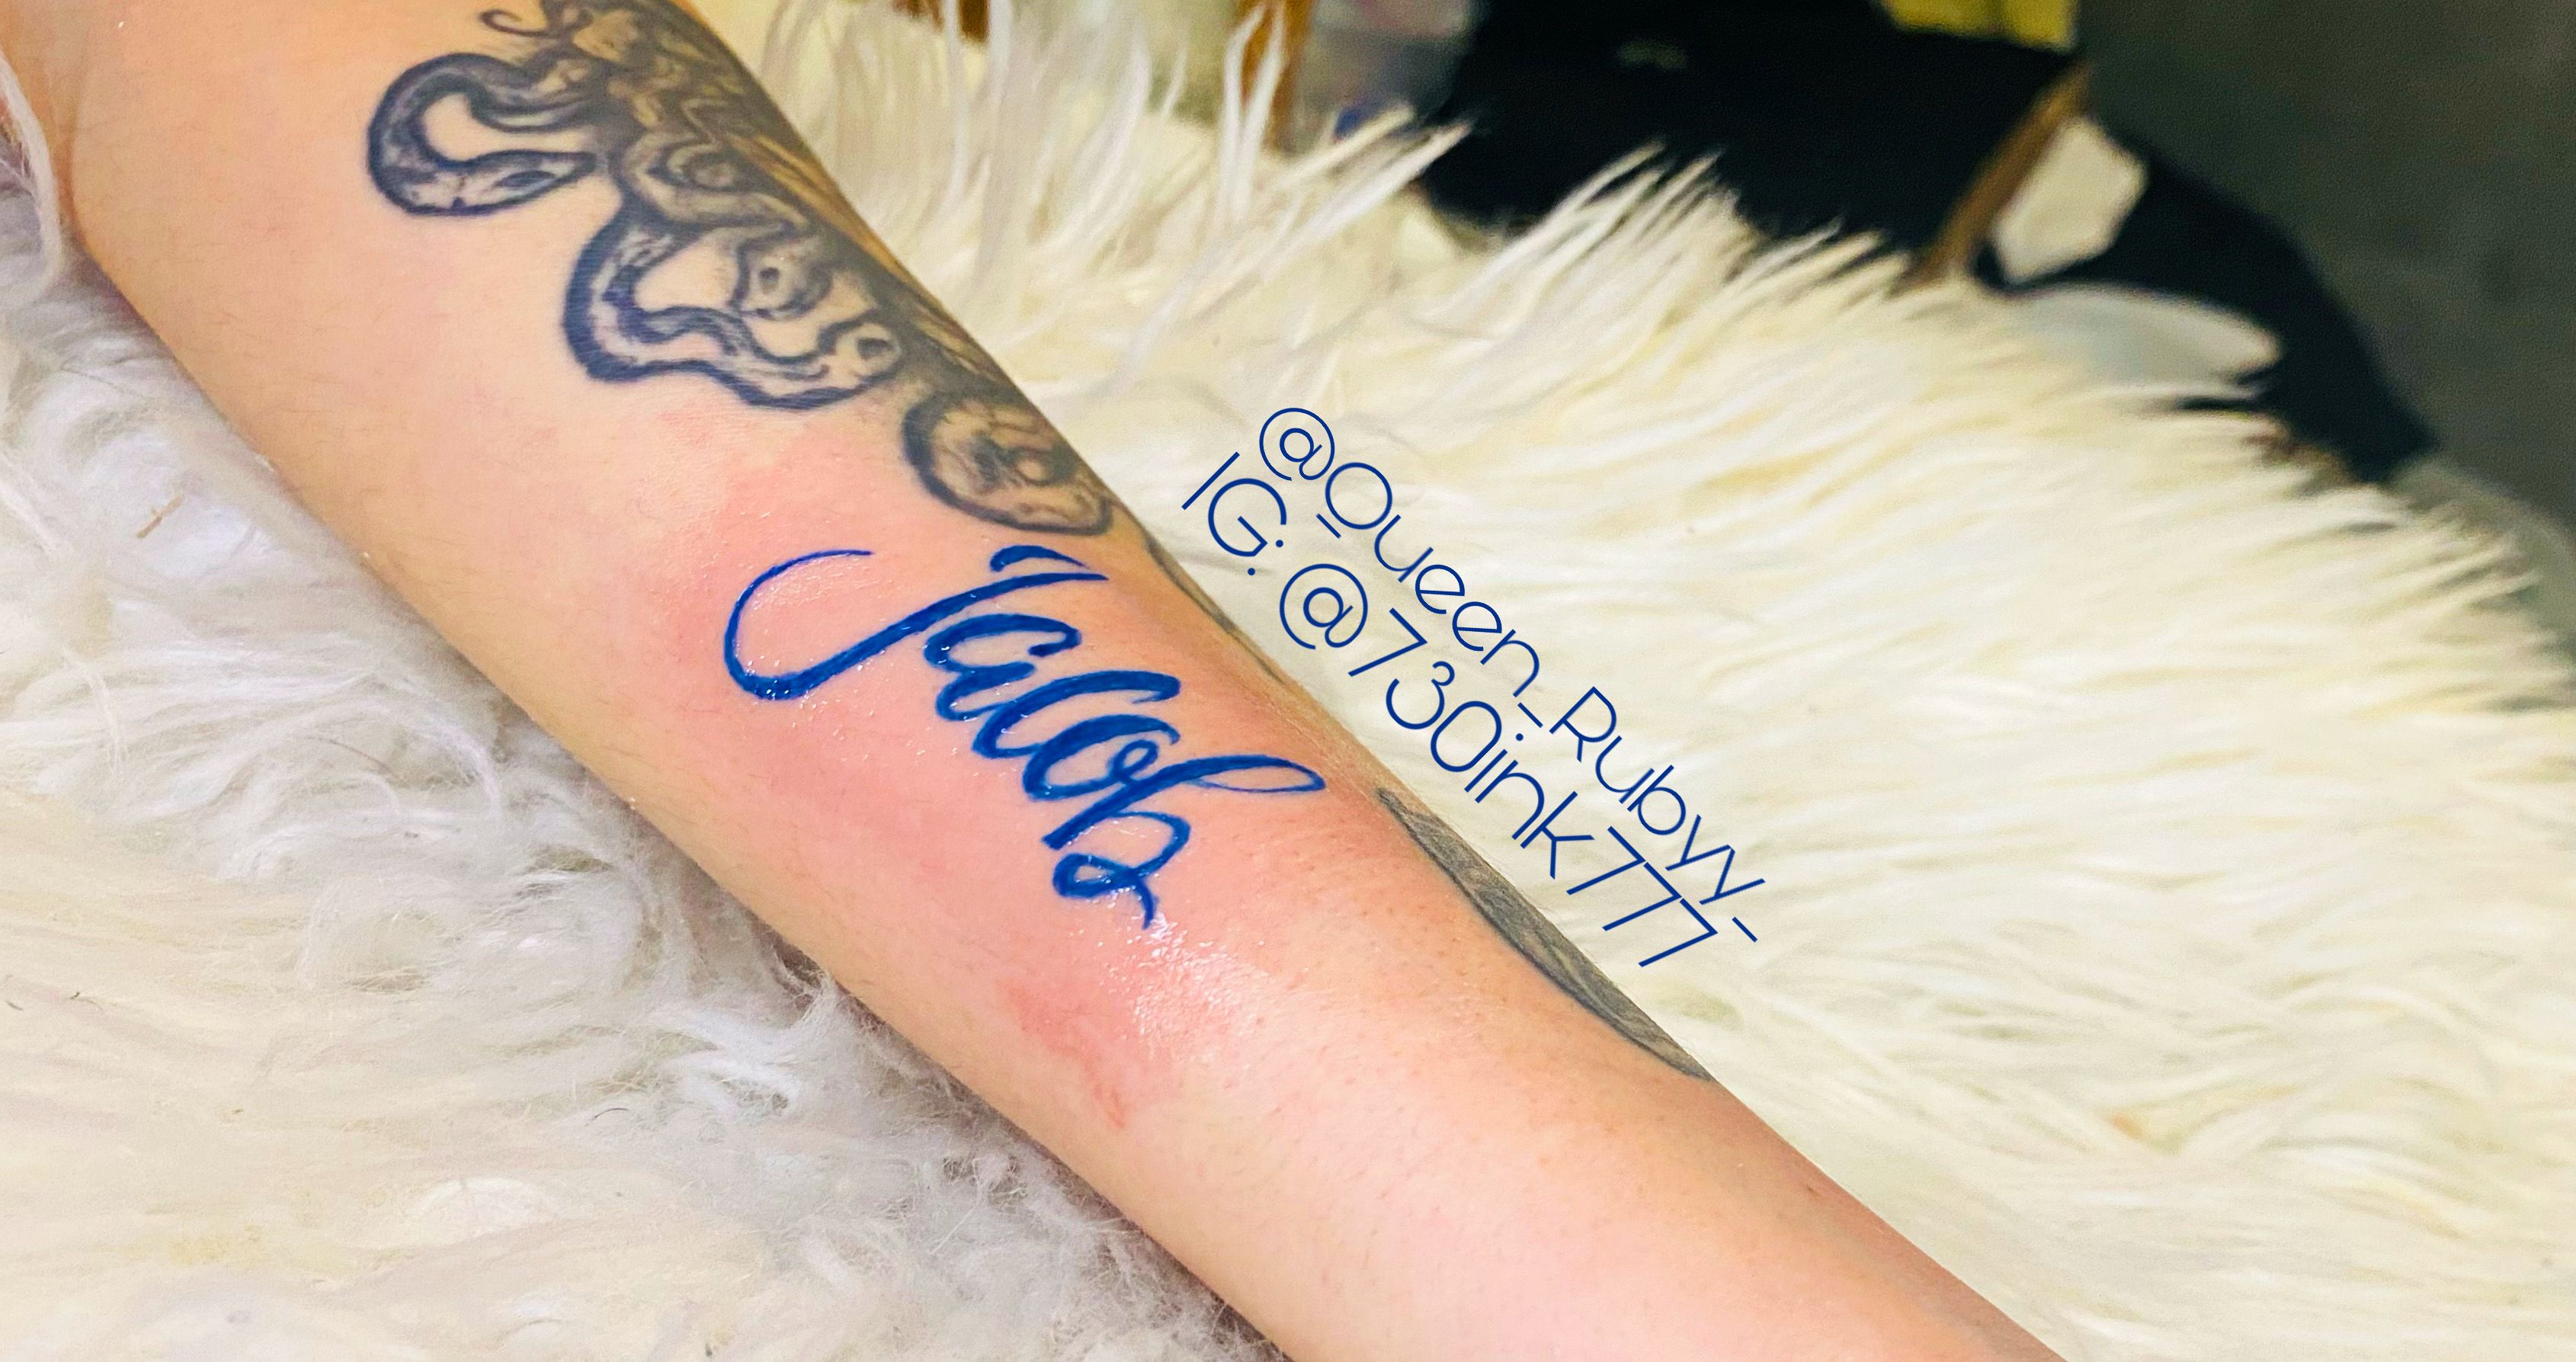 Tattoo uploaded by Crystal A Gayle • “Jacob” Inner forearm • Tattoodo